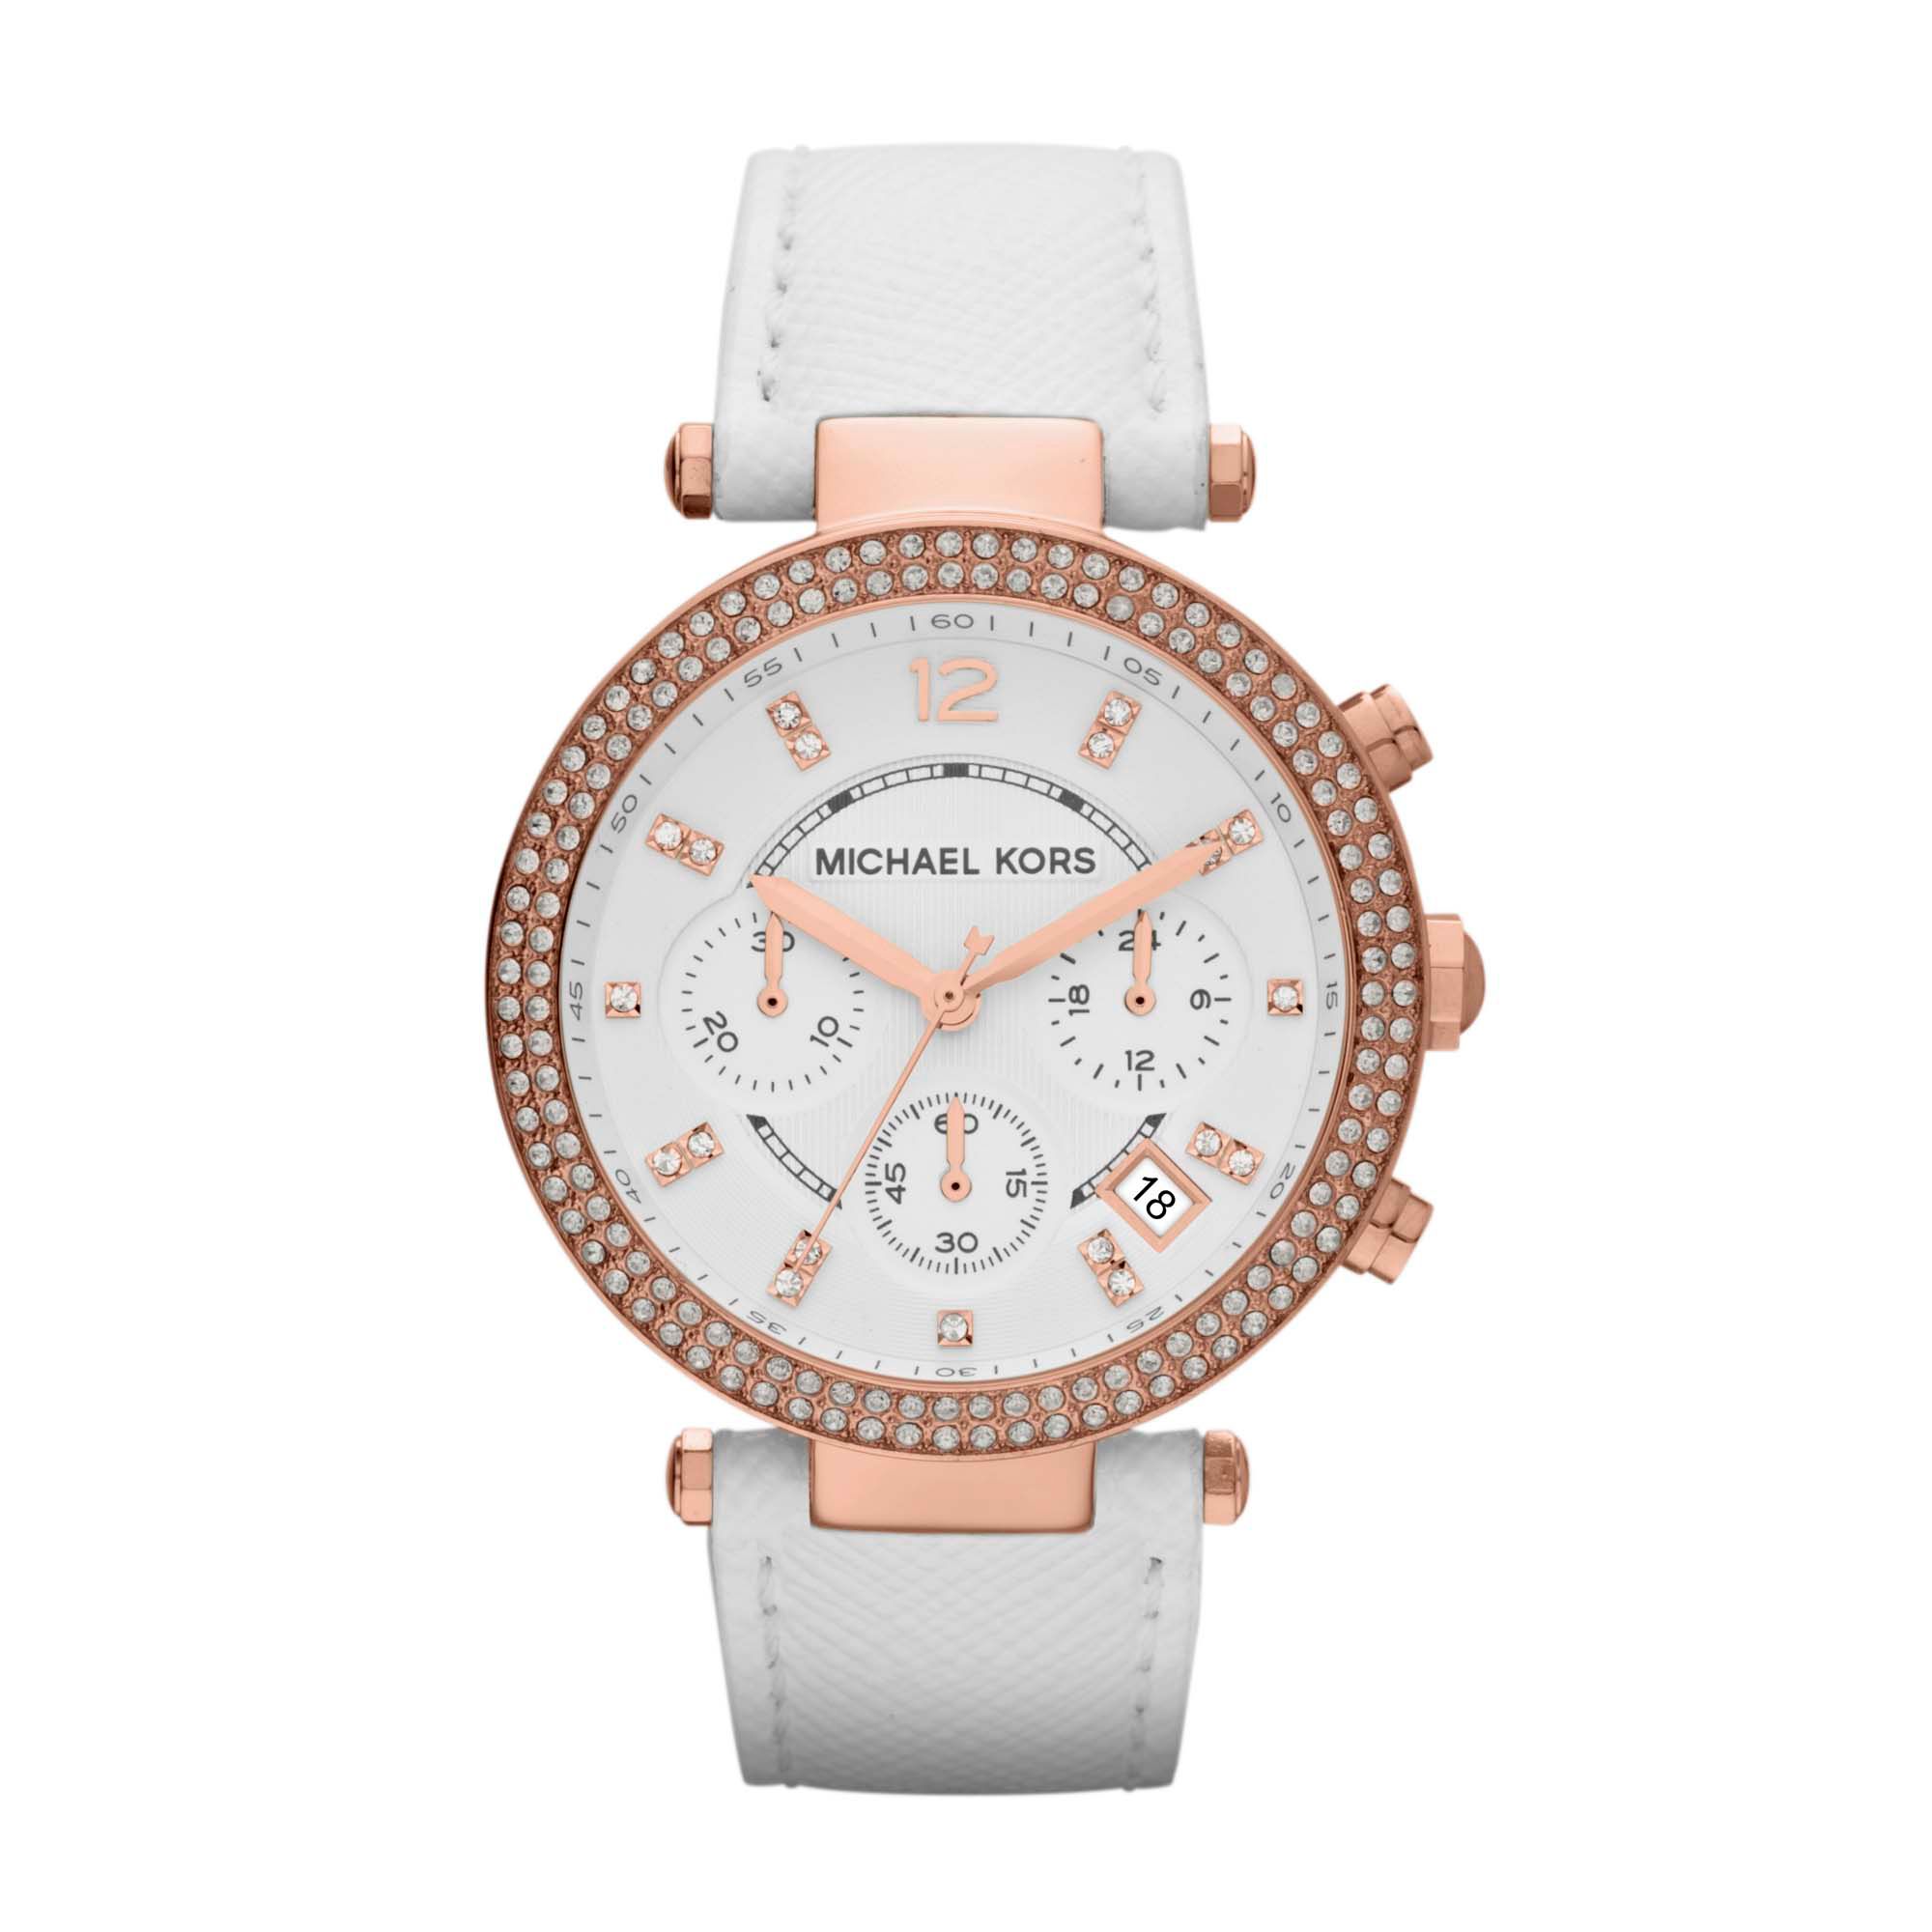 Michael Kors Parker Chronograph Rose Gold-tone White Leather Ladies Watch MK2281  $145.98 